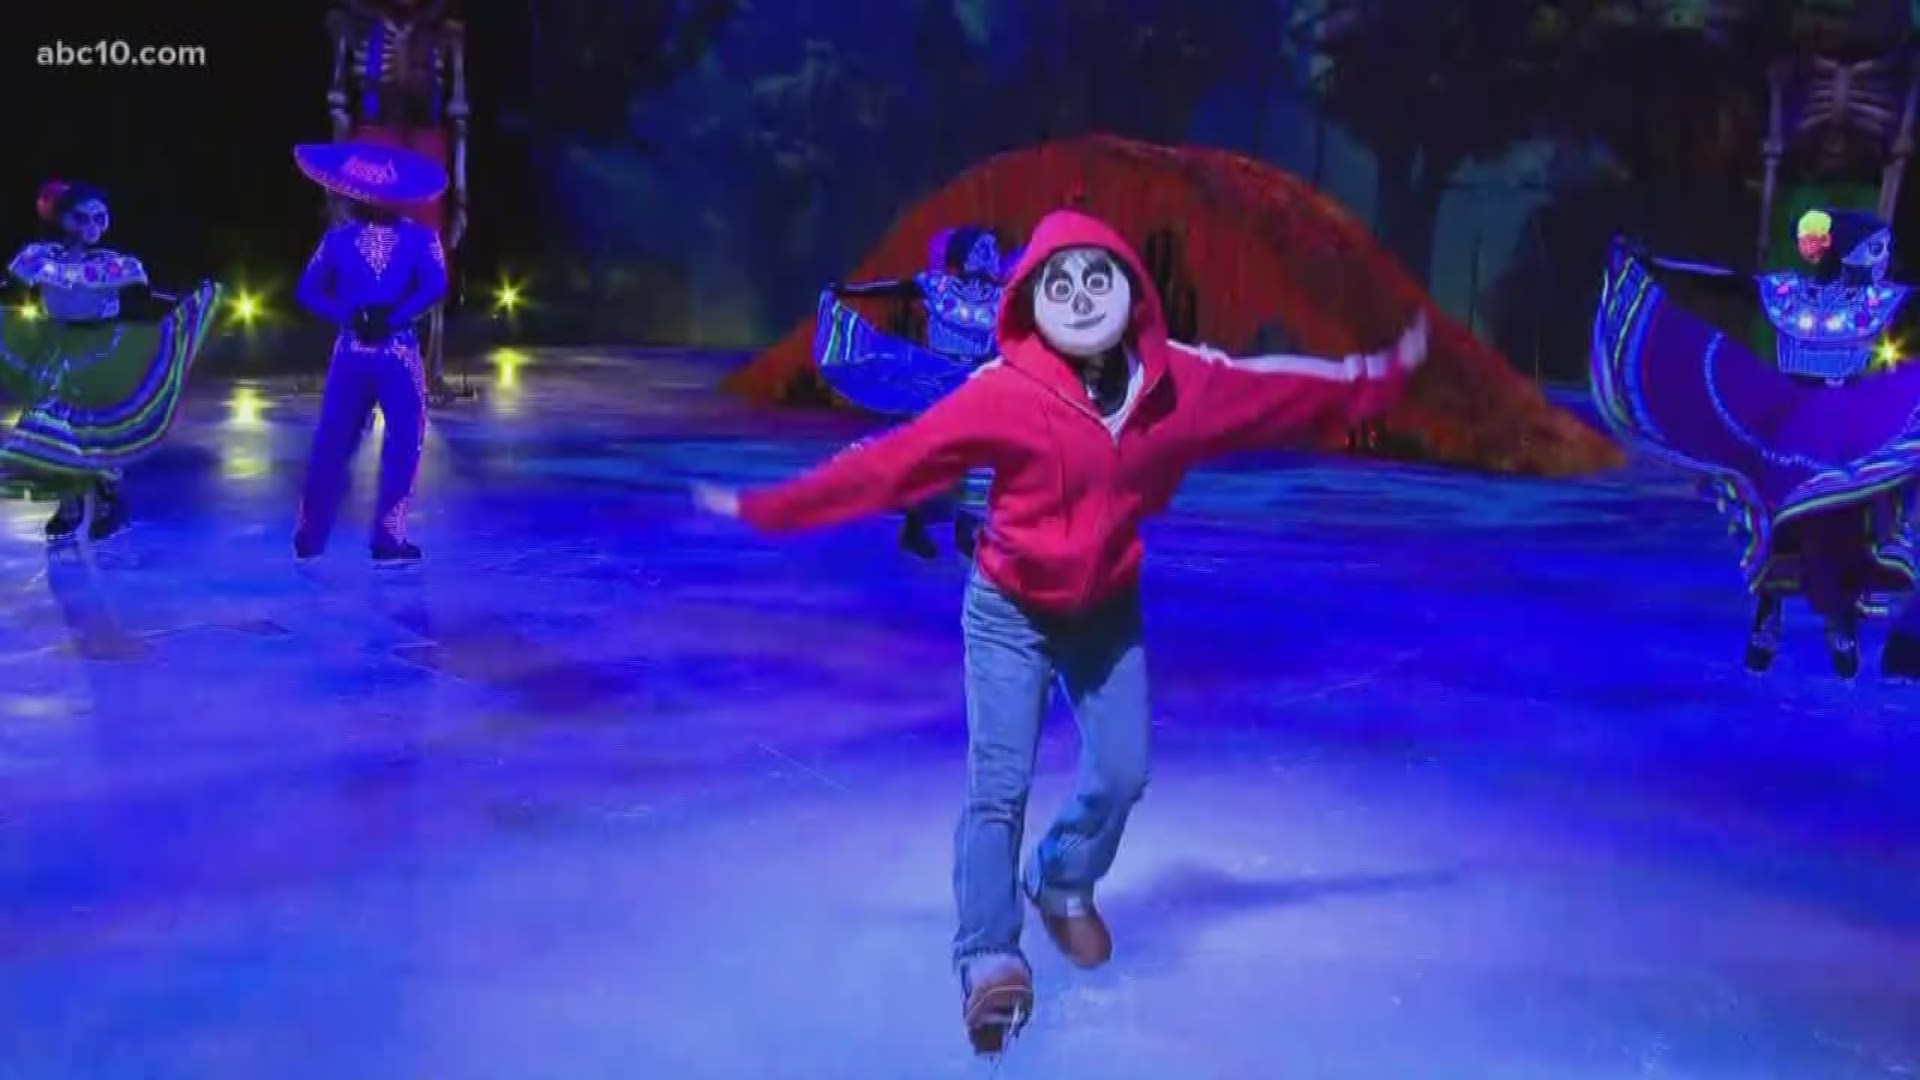 To celebrate Valentine's Day and a wedding live on television, the cast of Disney on Ice put on a special performance of 'Coco' for the newly married couple.